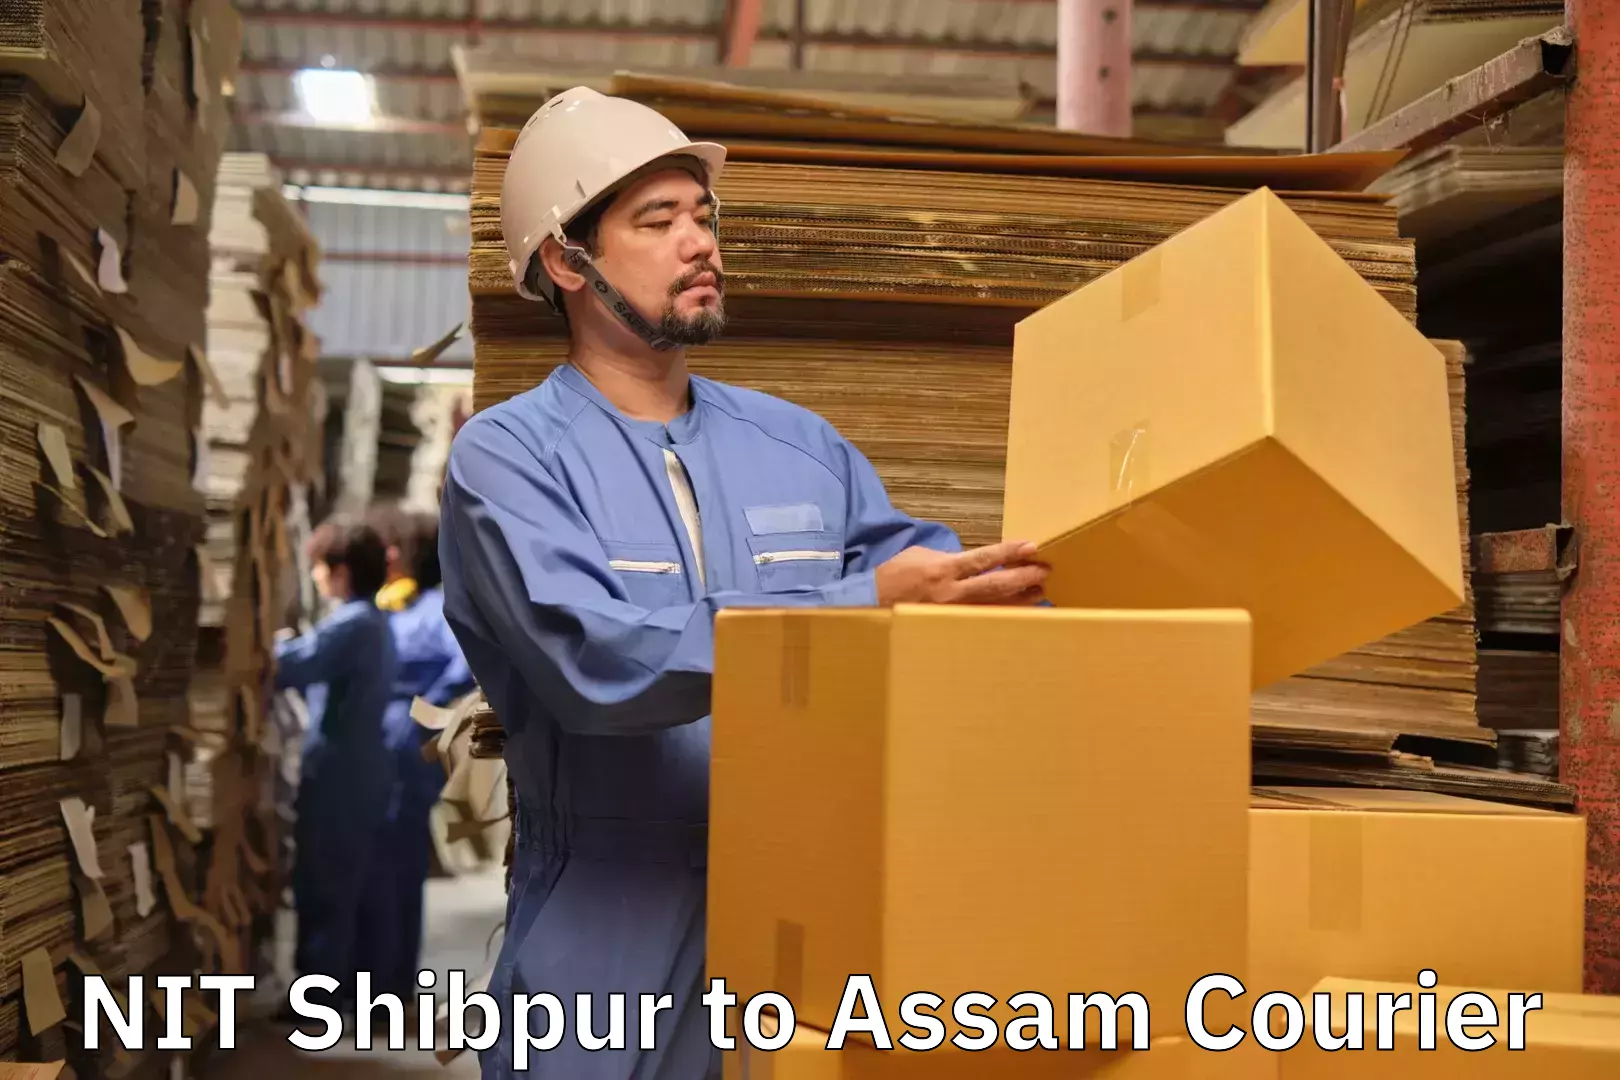 Luggage shipment specialists NIT Shibpur to Assam